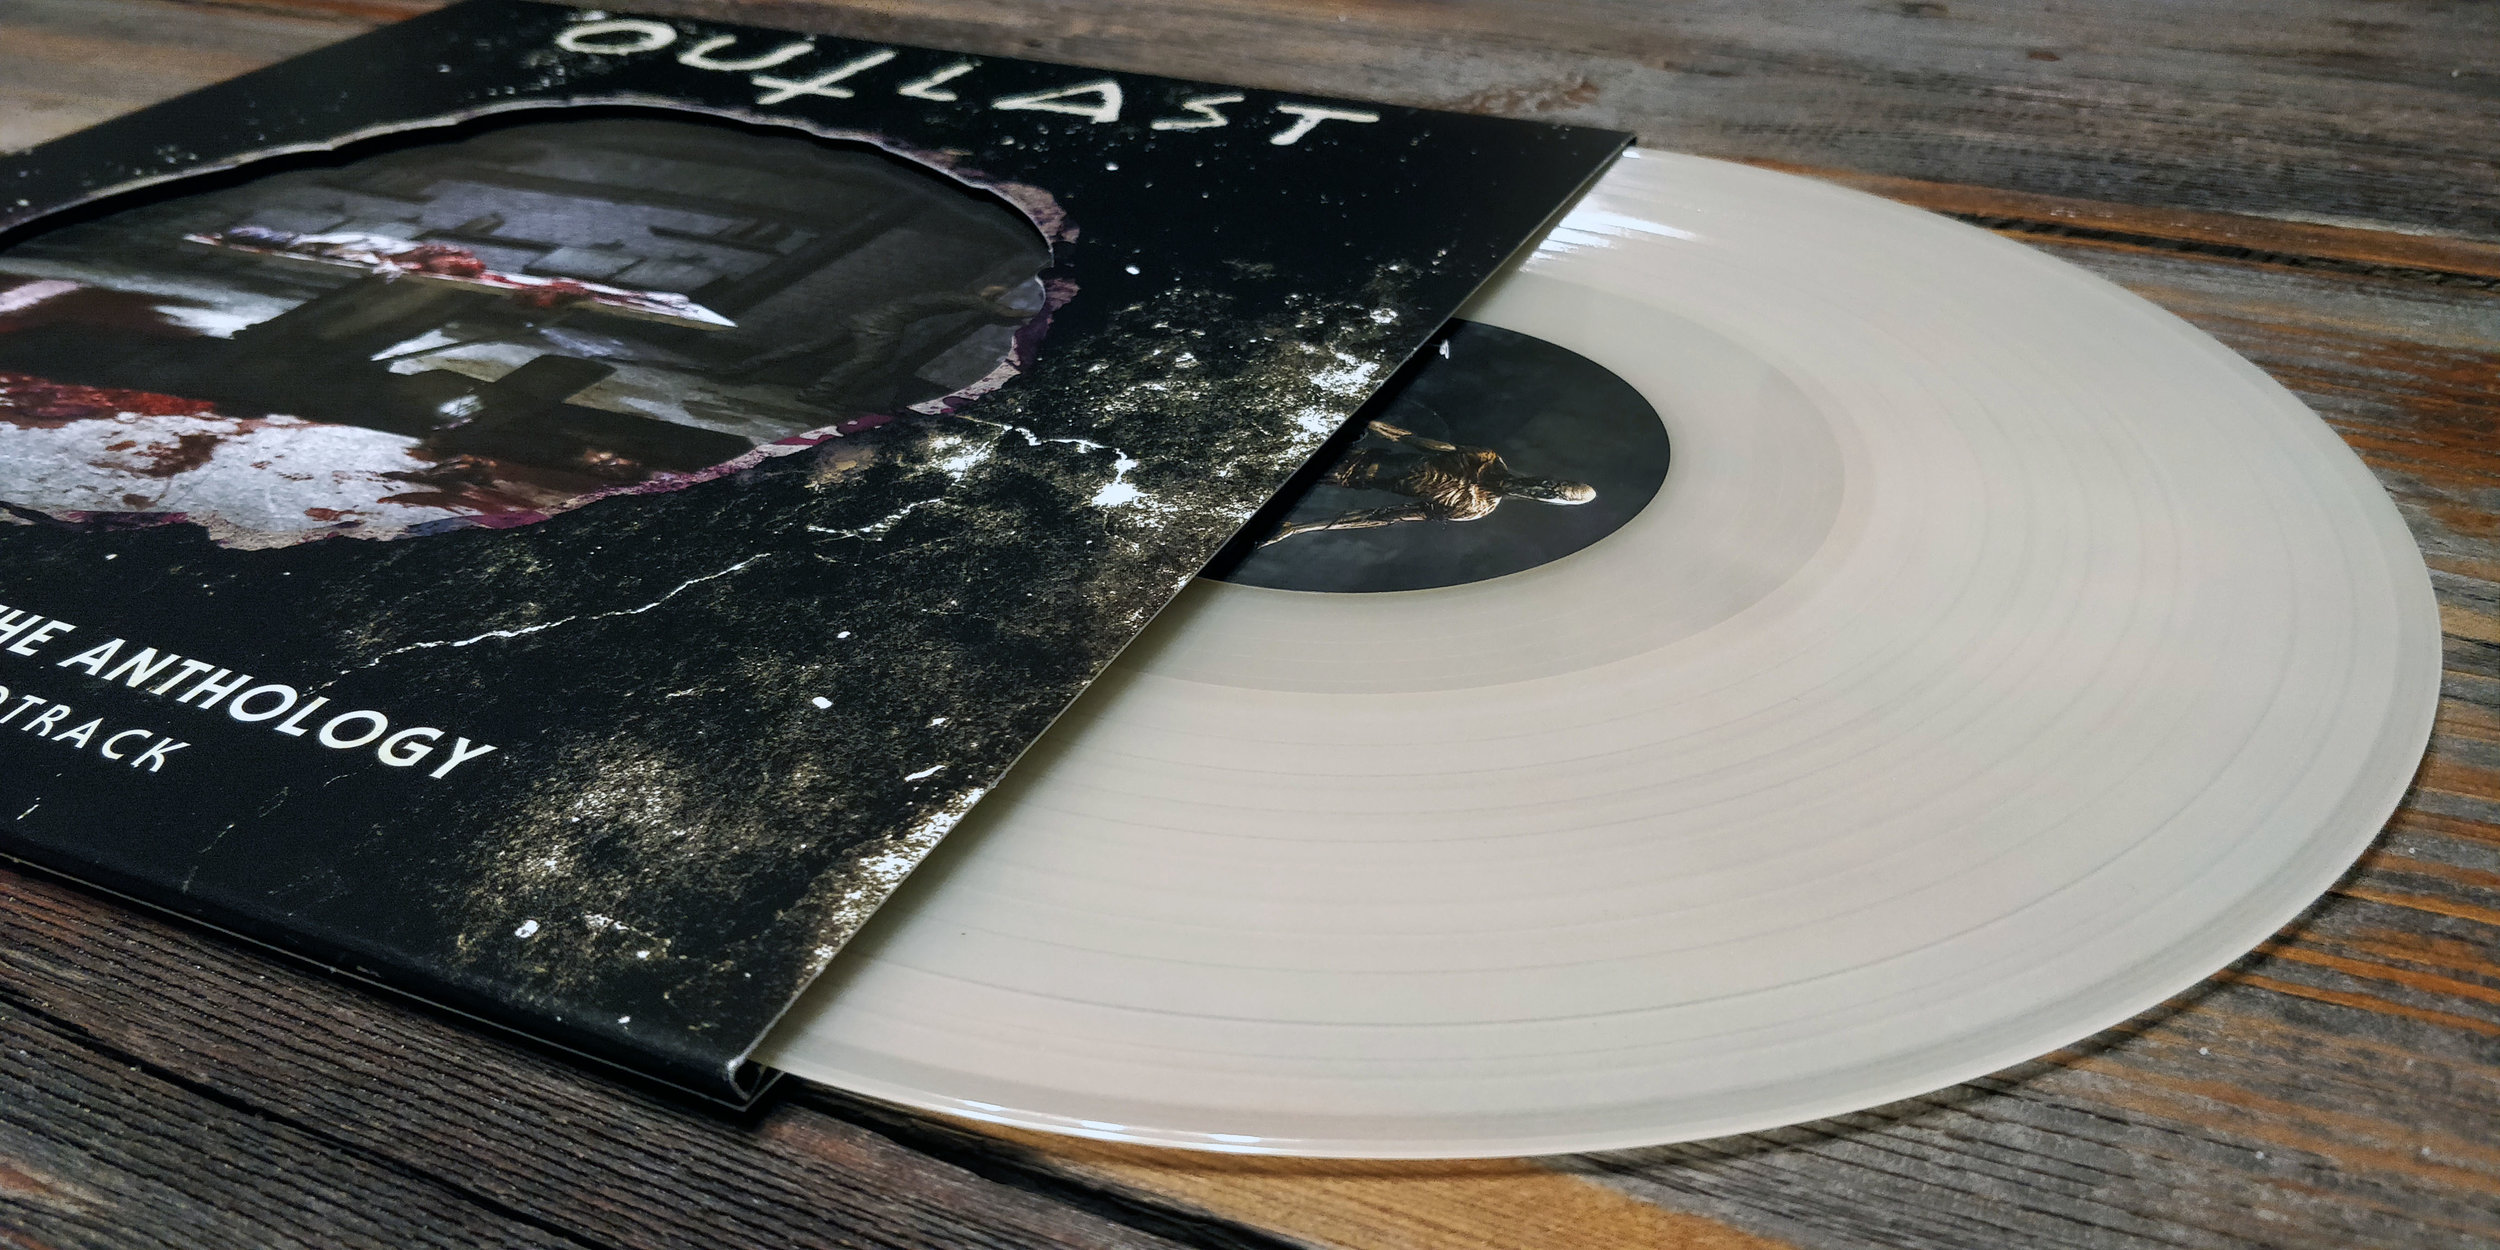 THE OUTLAST TRIALS Soundtrack Streaming on Music Services & Vinyl